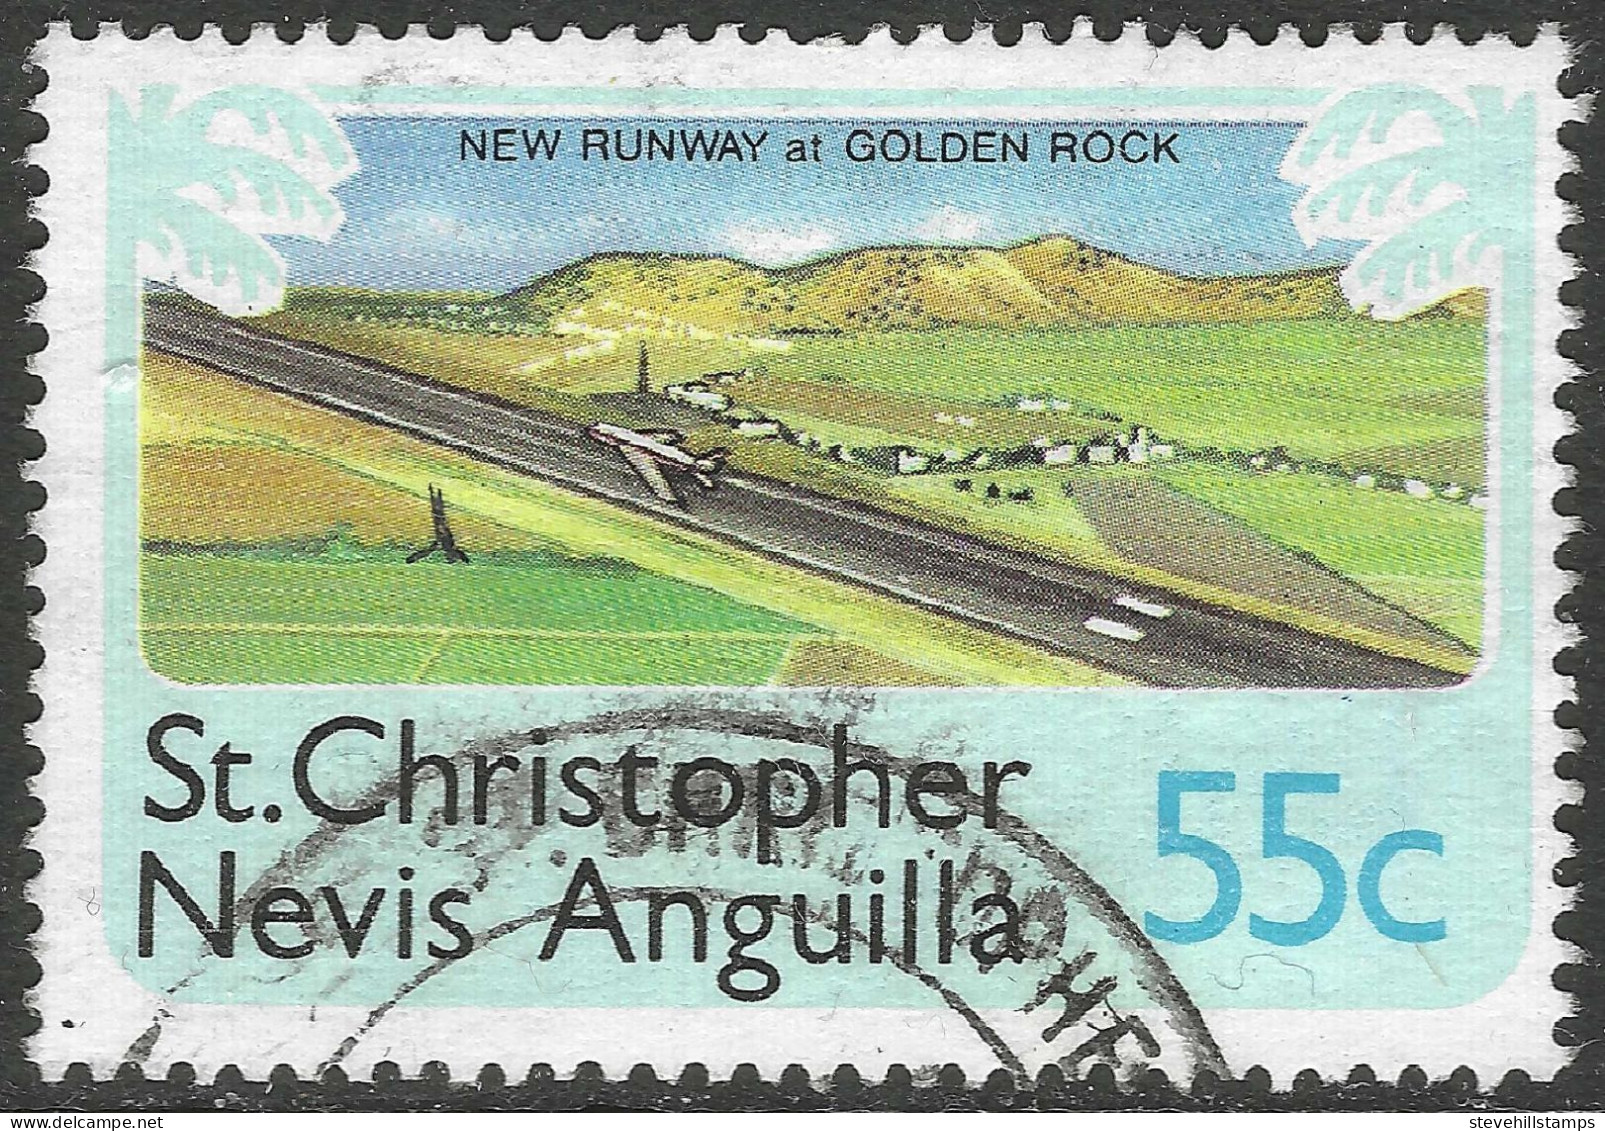 St Kitts-Nevis. 1978 Definitives. 55c Used. SG 403. M3147 - St.Christopher-Nevis & Anguilla (...-1980)